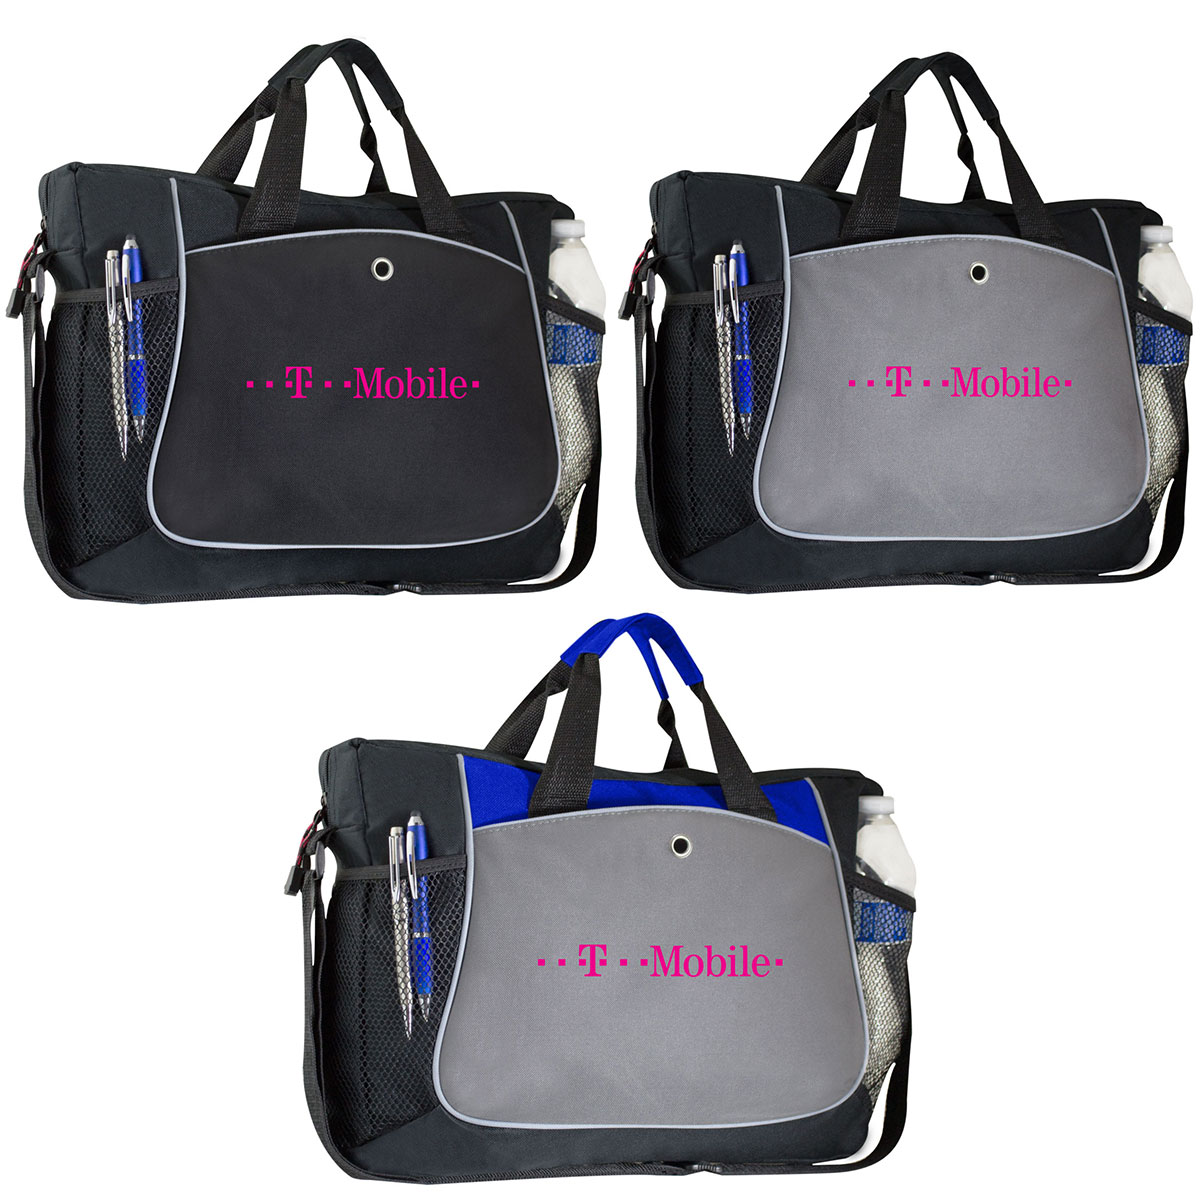 COMPUTER BAGS